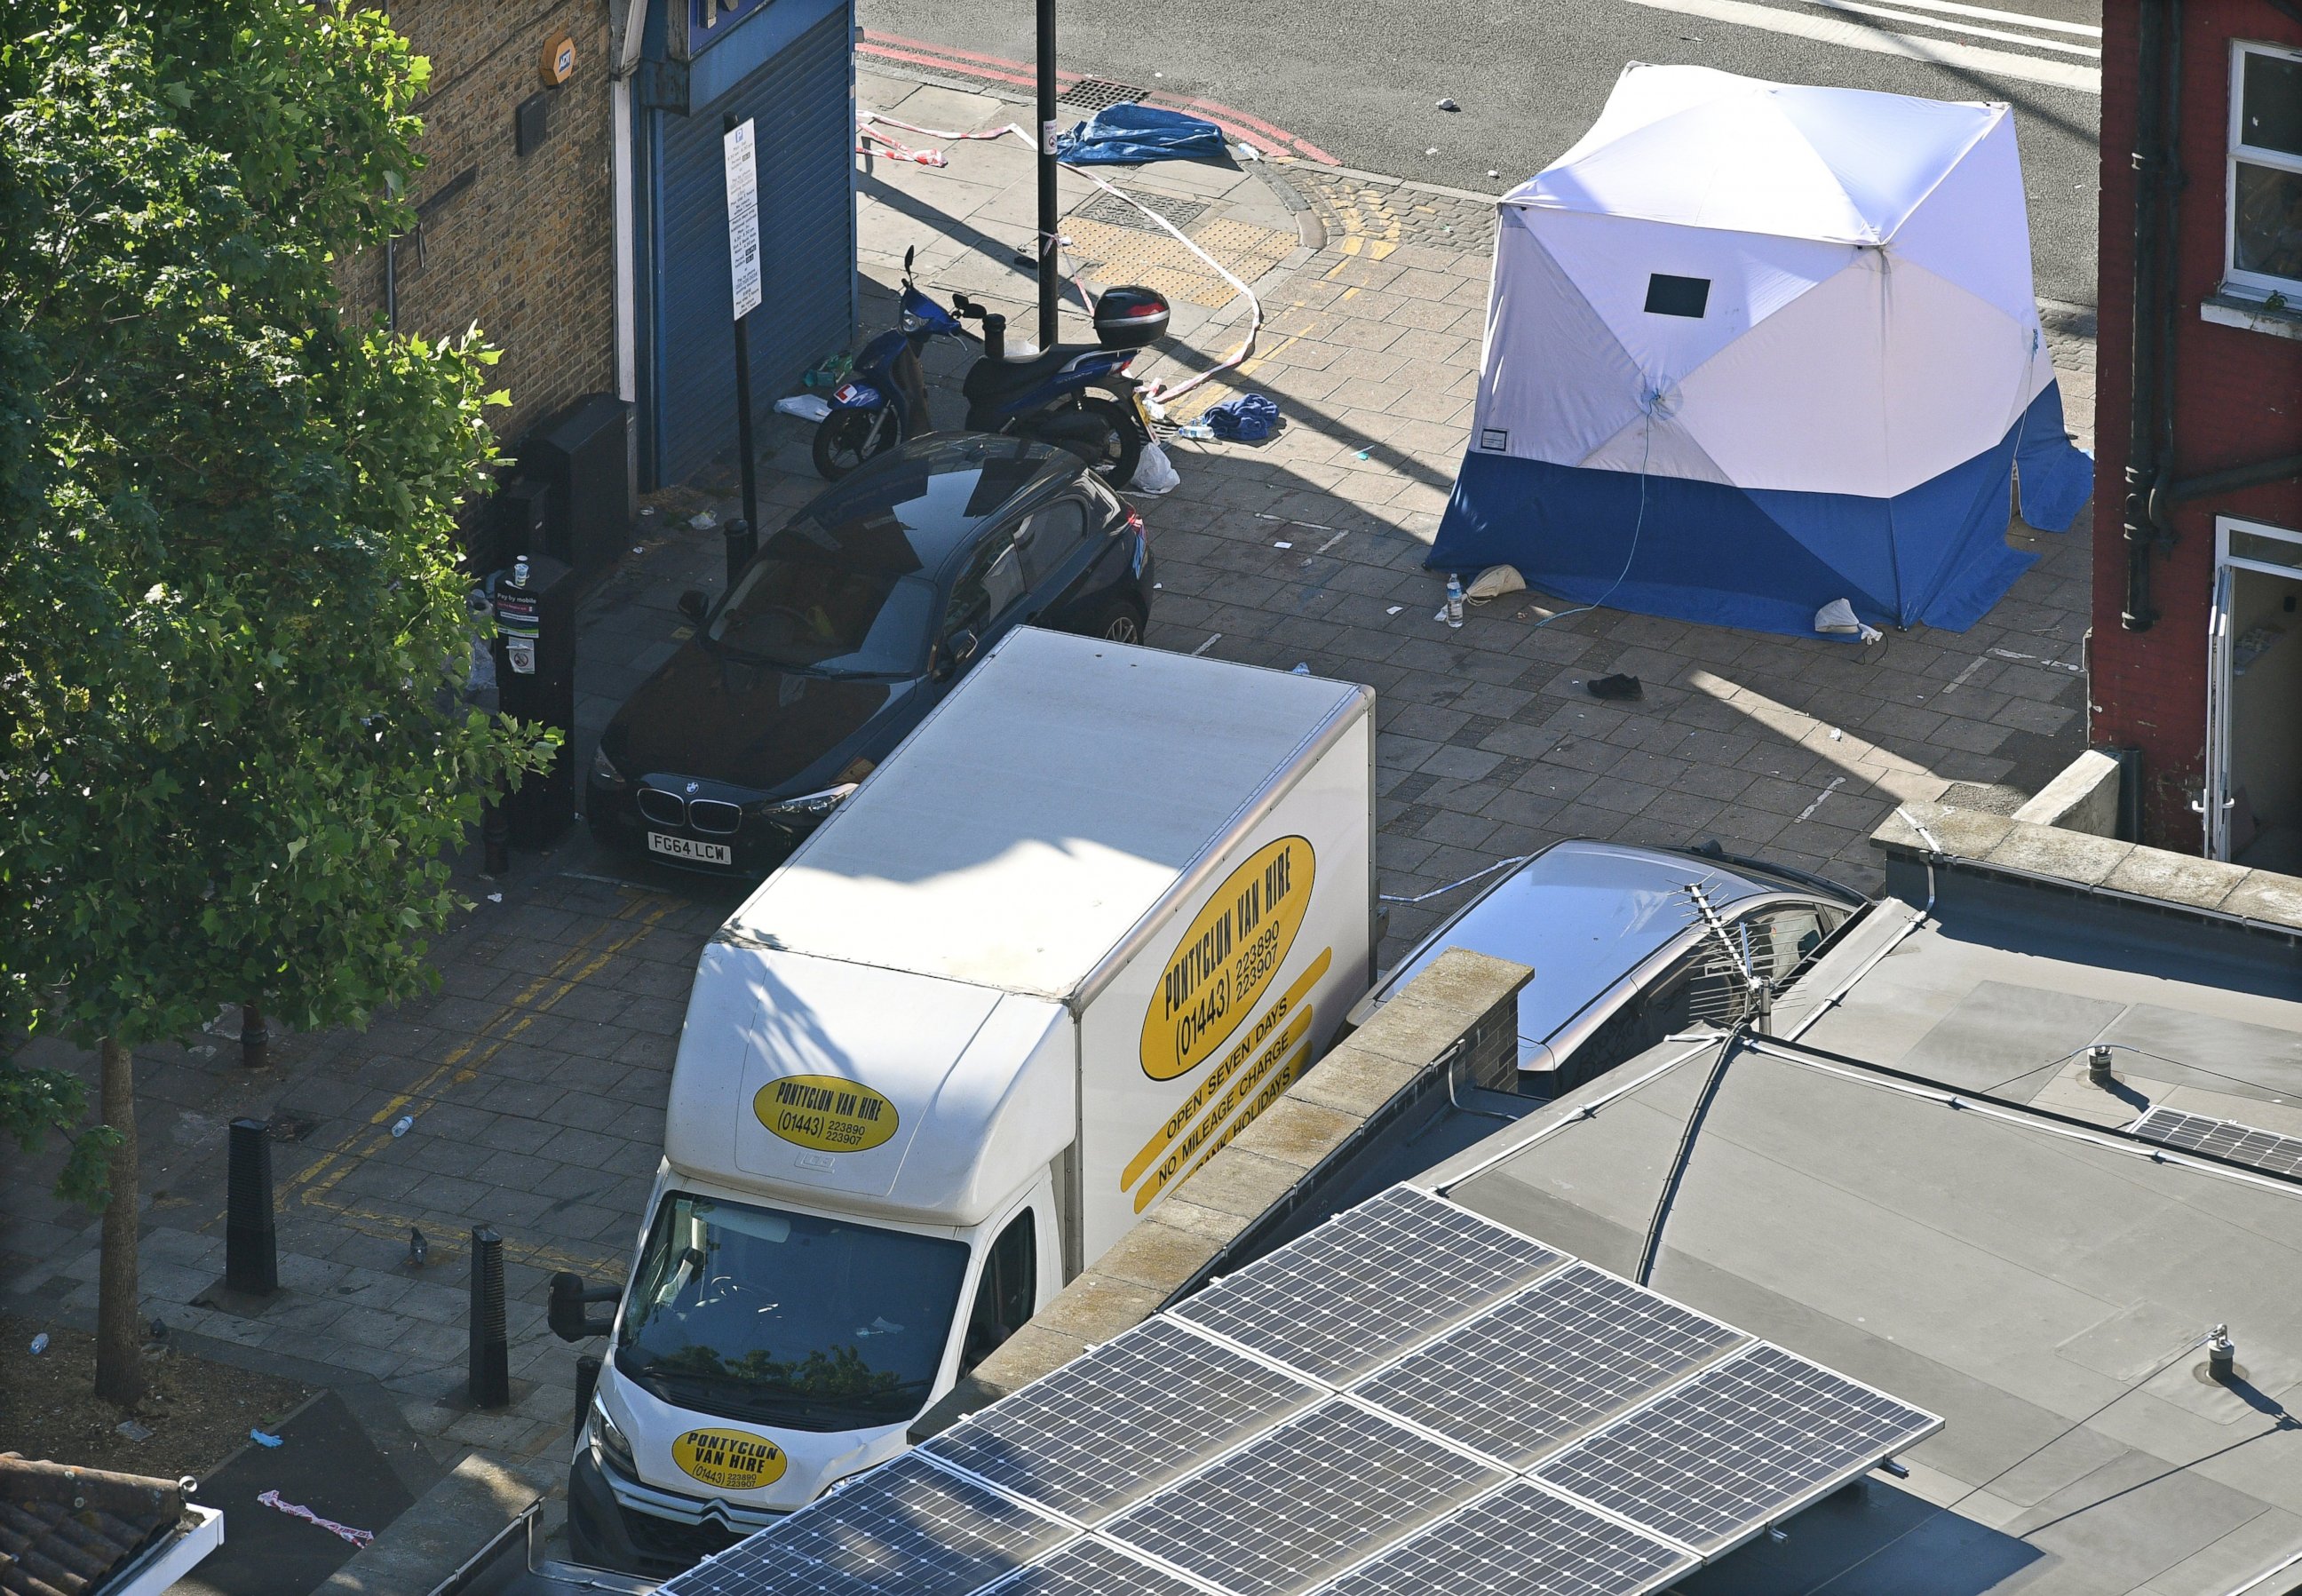 PHOTO: British forensic experts stand next to the van and a forensic tent in Finsbury Park, after a van hit worshipers in north London, June 19, 2017.